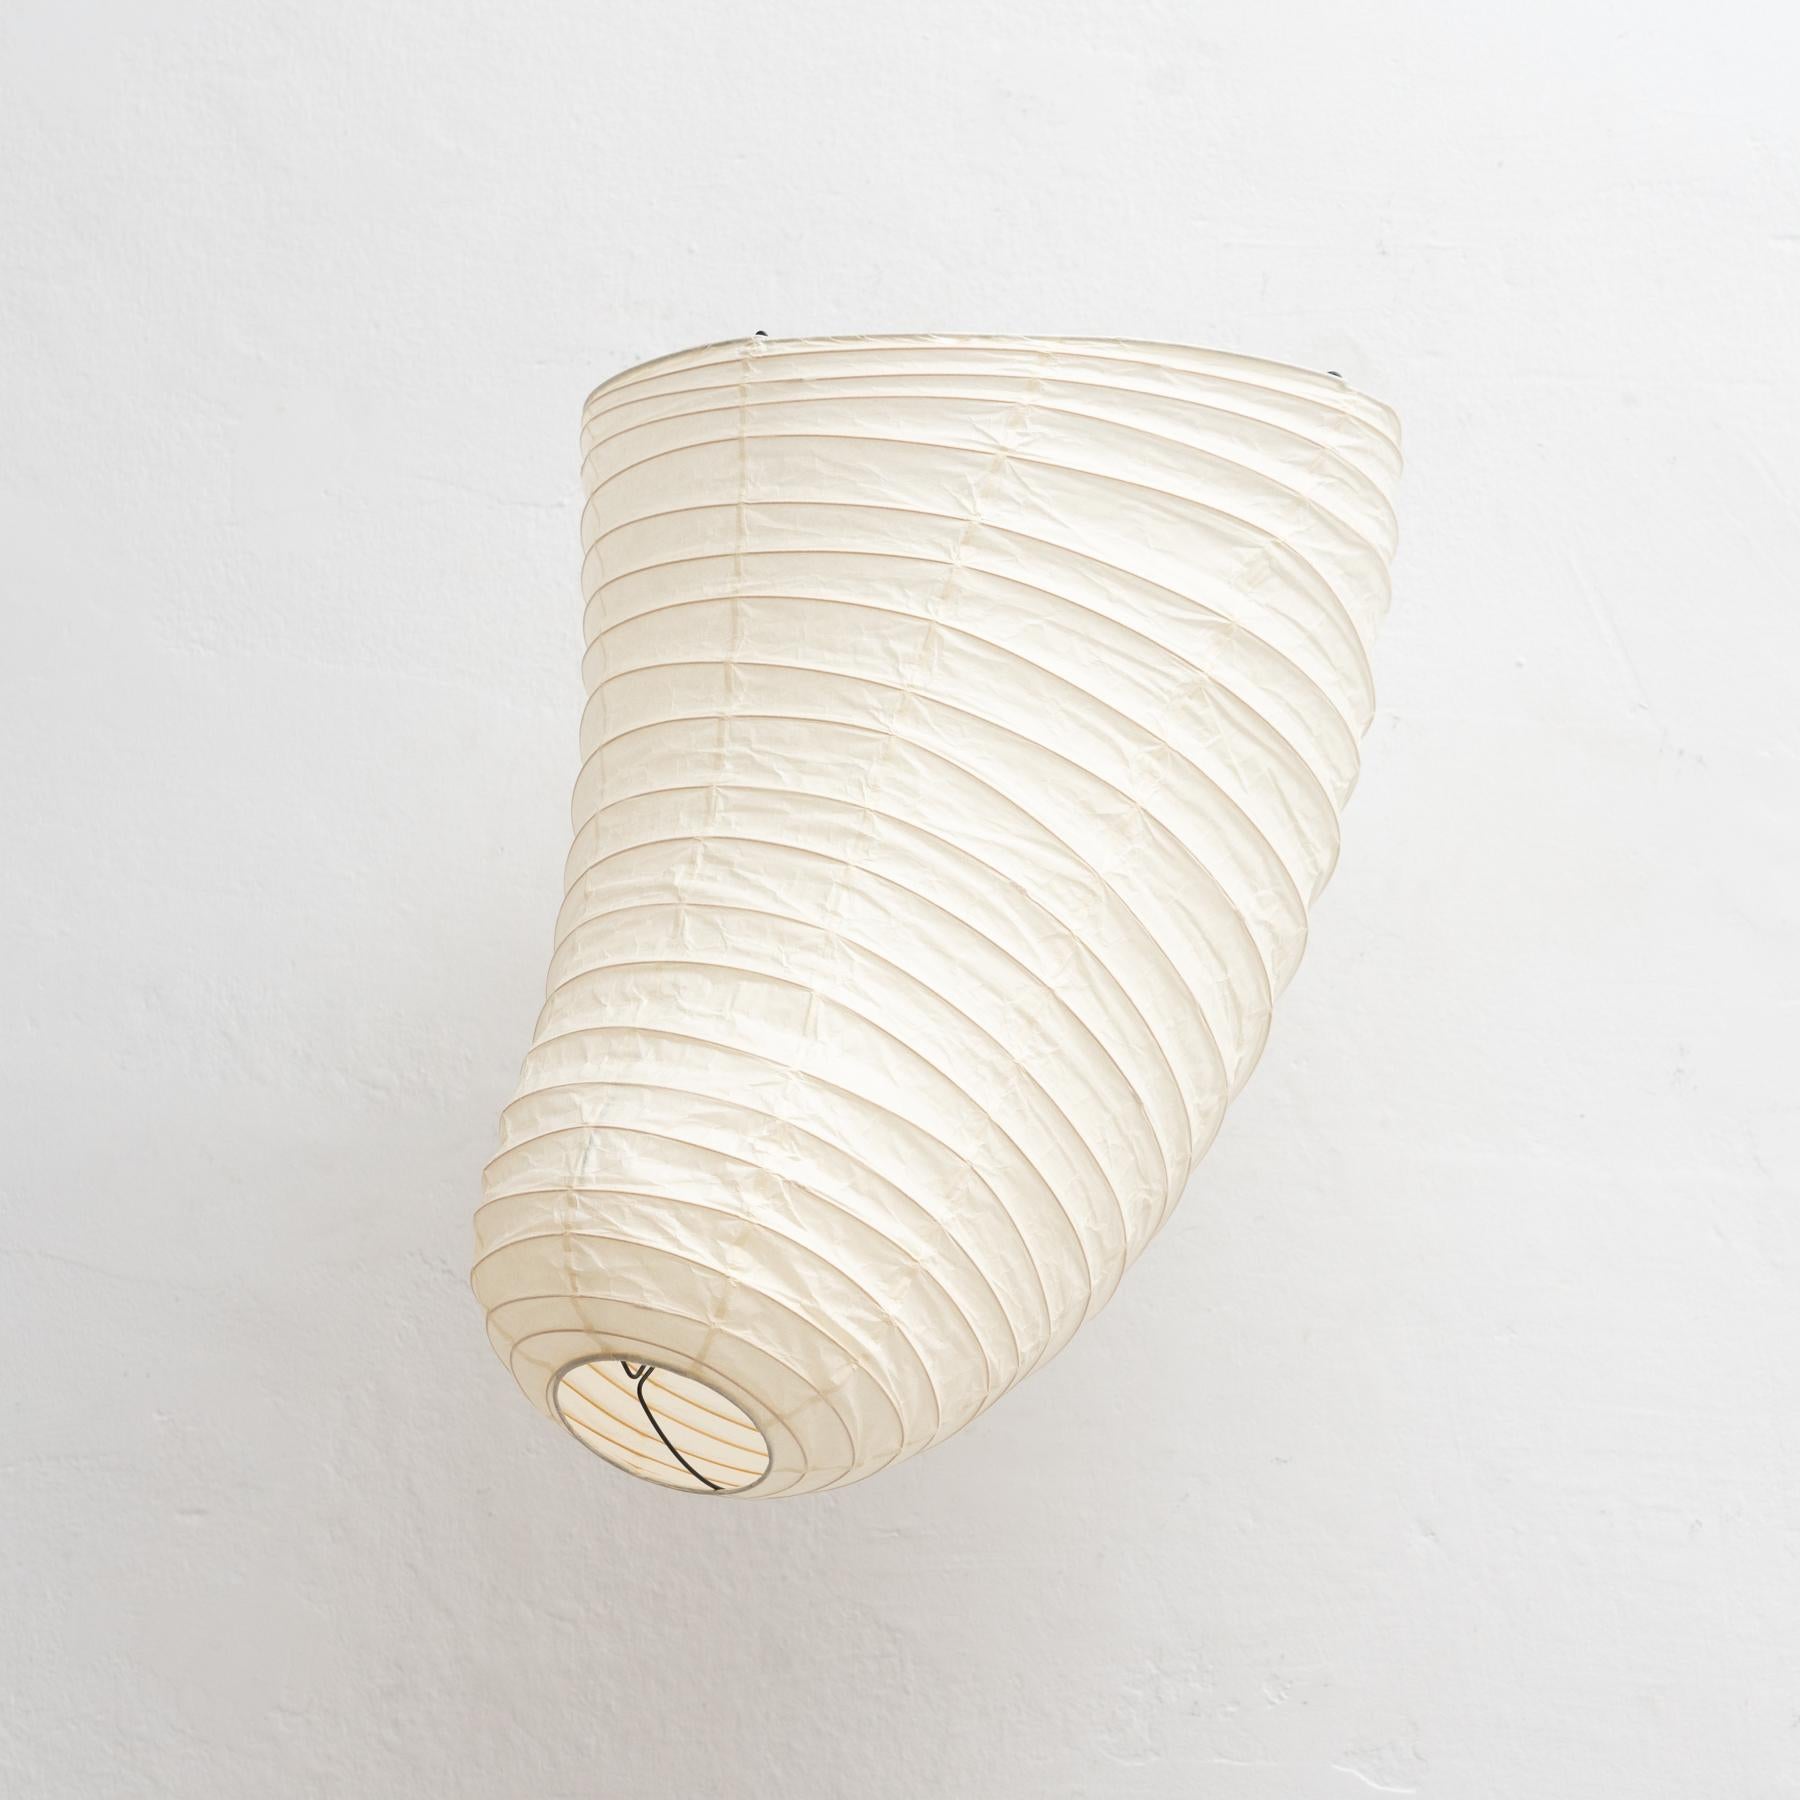 VB13 ceiling lamp, designed by Isamu Noguchi in 1951.

Made of a bamboo ribbing structure covered by washi paper manufactured according to the traditional procedures.

Manufactured by Ozeki & Company Ltd. in Japan, circa 1980.

In original